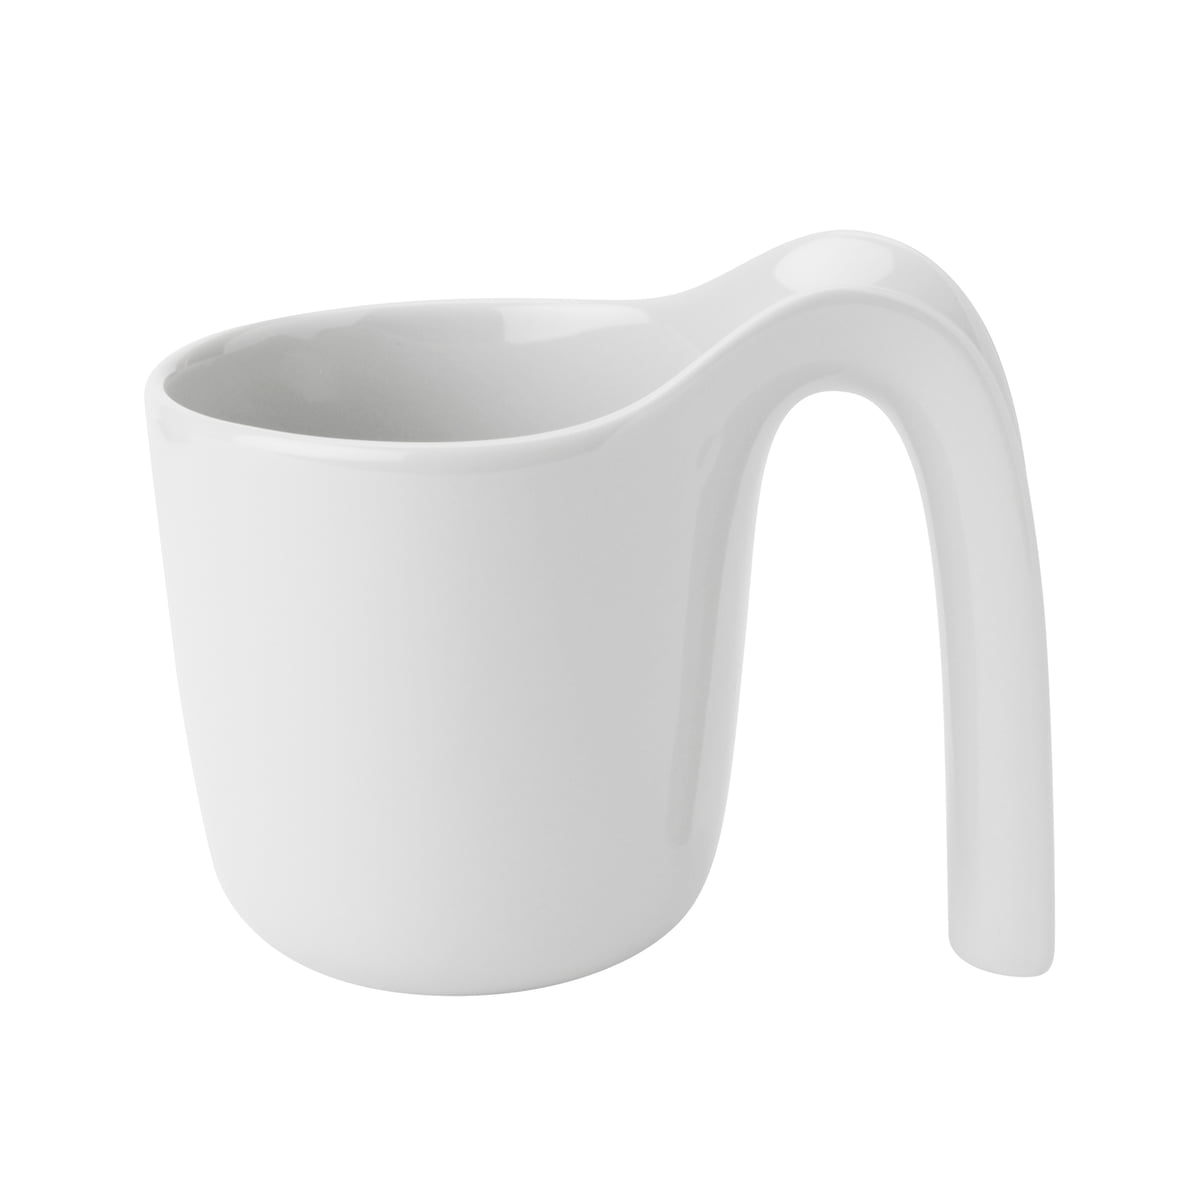 RIG-TIG by Stelton - Ole Becher